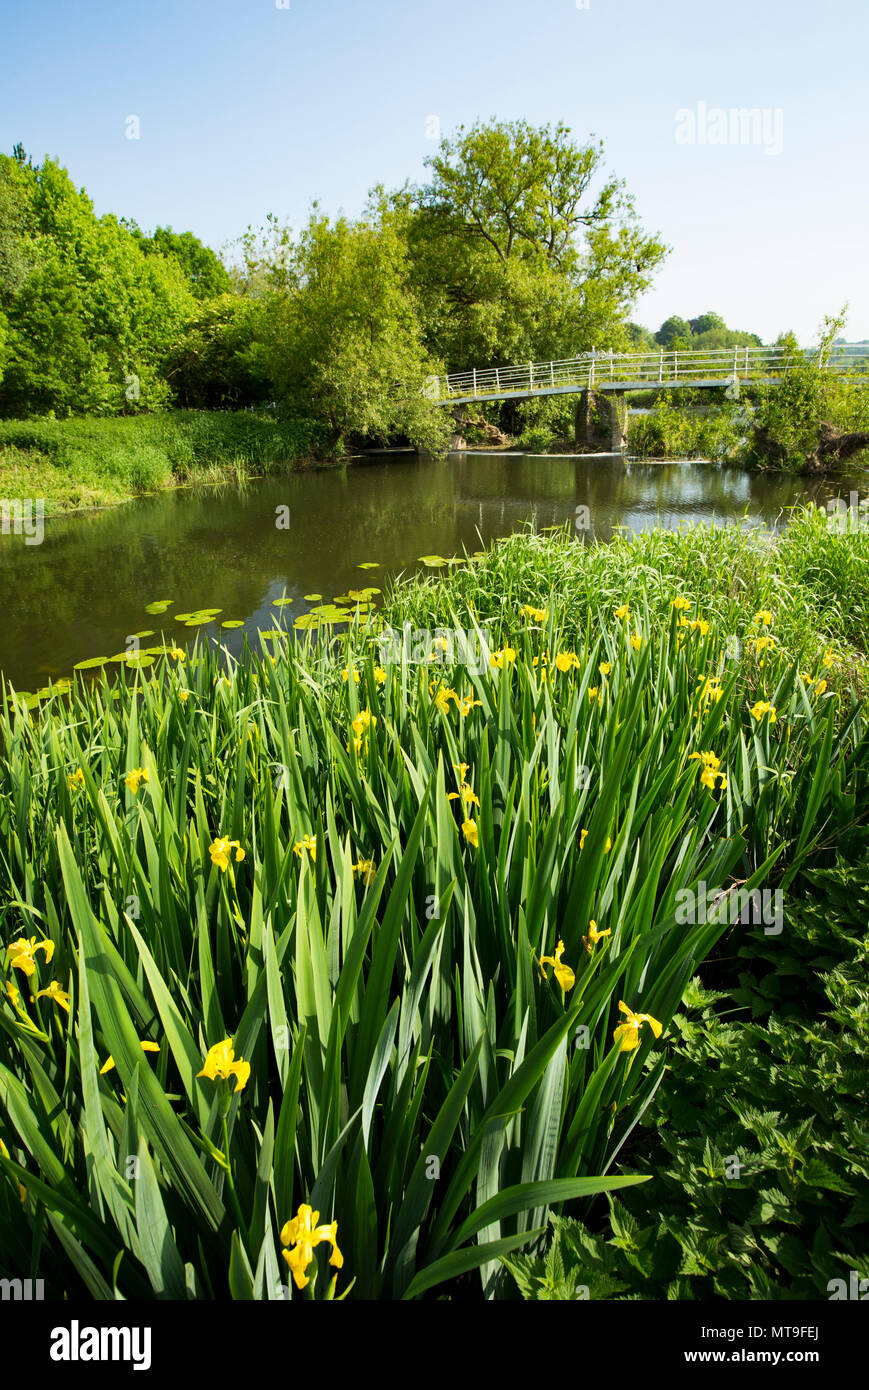 Yellow Iris, Iris pseudacorus, also known as yellow flag, growing on the banks of the Dorset Stour River near Colber Bridge, seen in the background, t Stock Photo